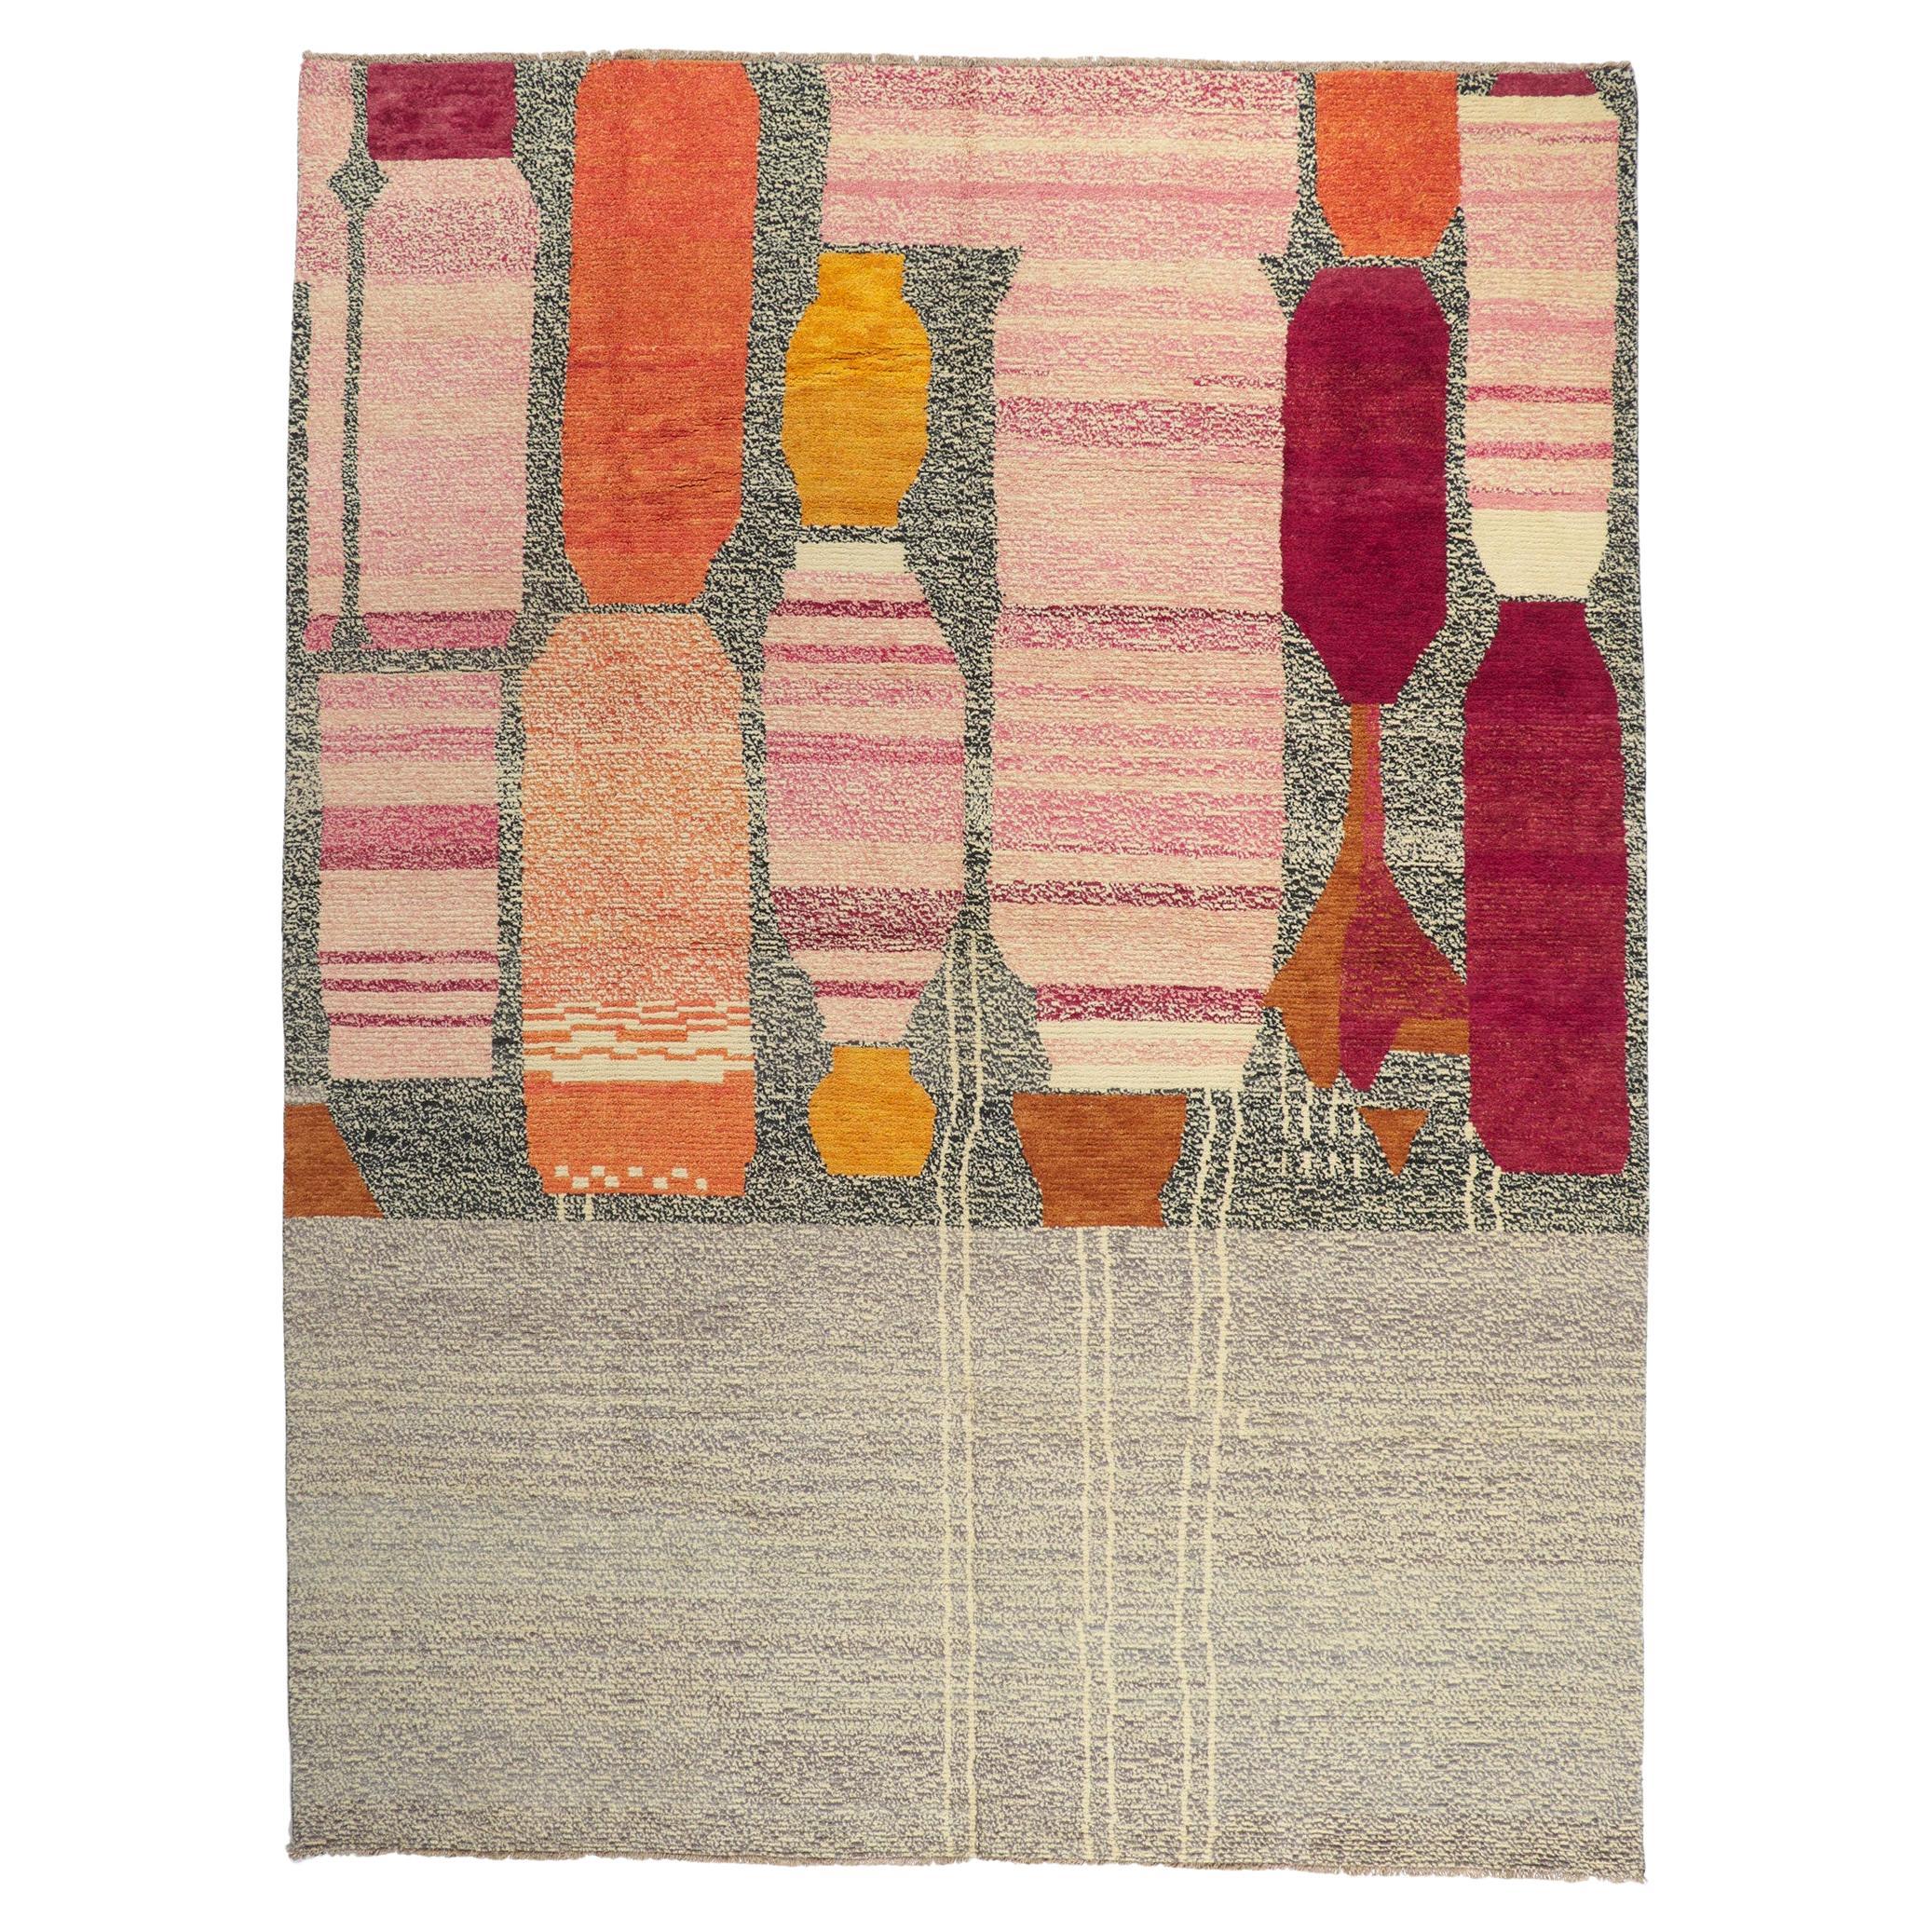 Modern Moroccan Rug Inspired by Paul Klee, Cubism Meets Ultra Cozy